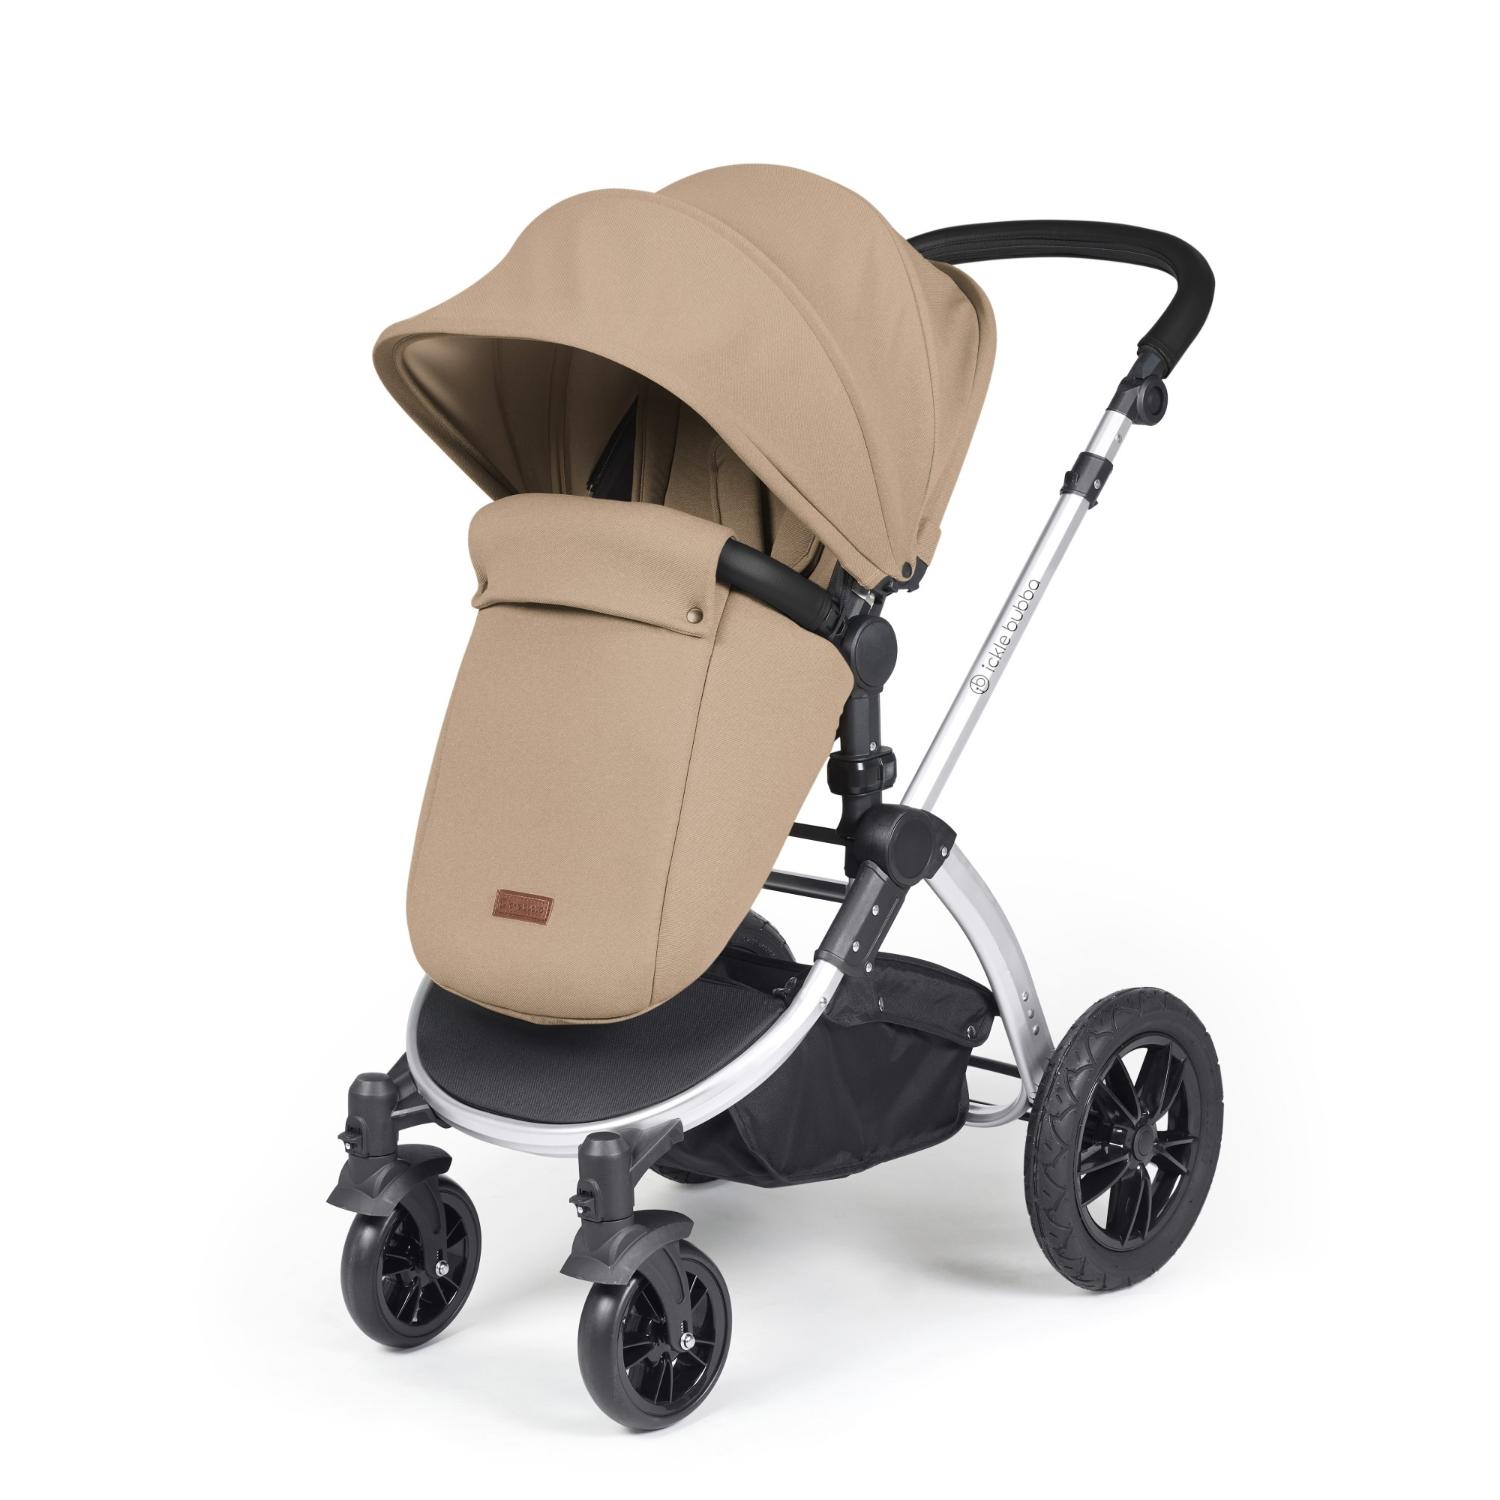 Ickle Bubba Stomp Luxe Pushchair with foot warmer attached in Desert beige colour with silver chassis